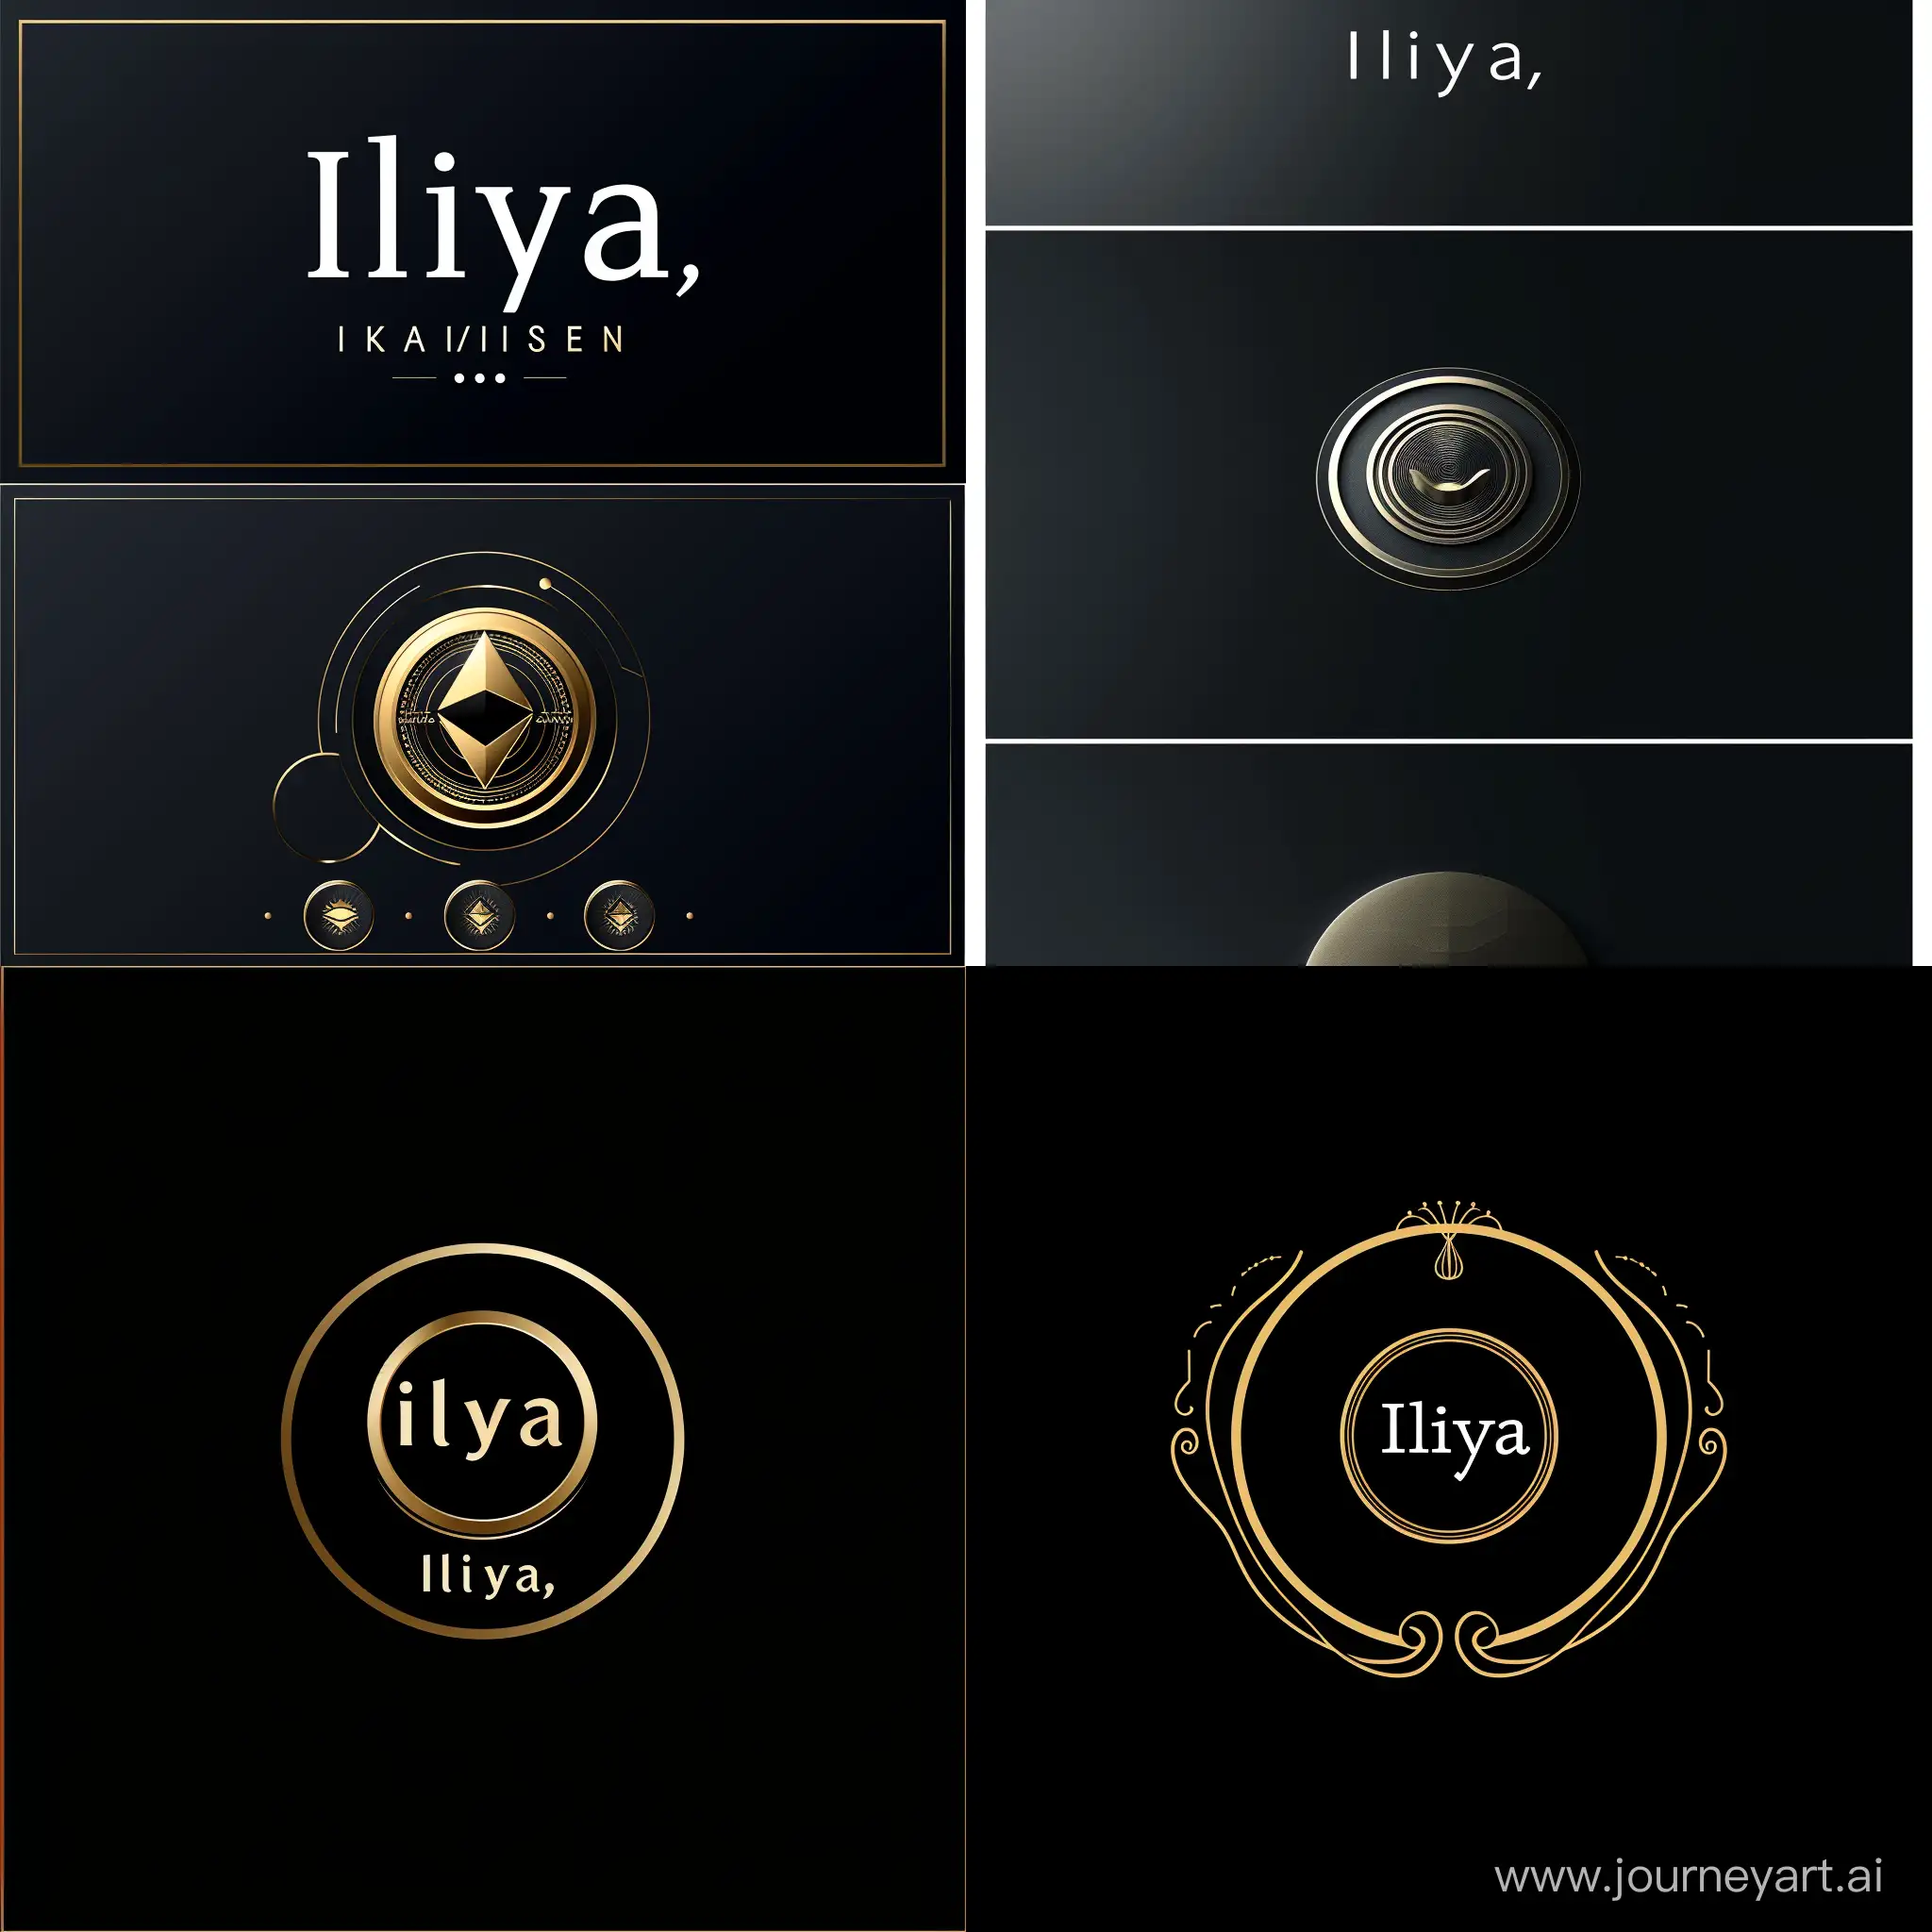 Design a sleek and modern logo for “Iliya,” a finance business, incorporating a coin. The logo should convey professionalism and trust, while also embodying a sense of financial growth and stability. Feel free to explore different concepts and elements to create a memorable and impactful design.
